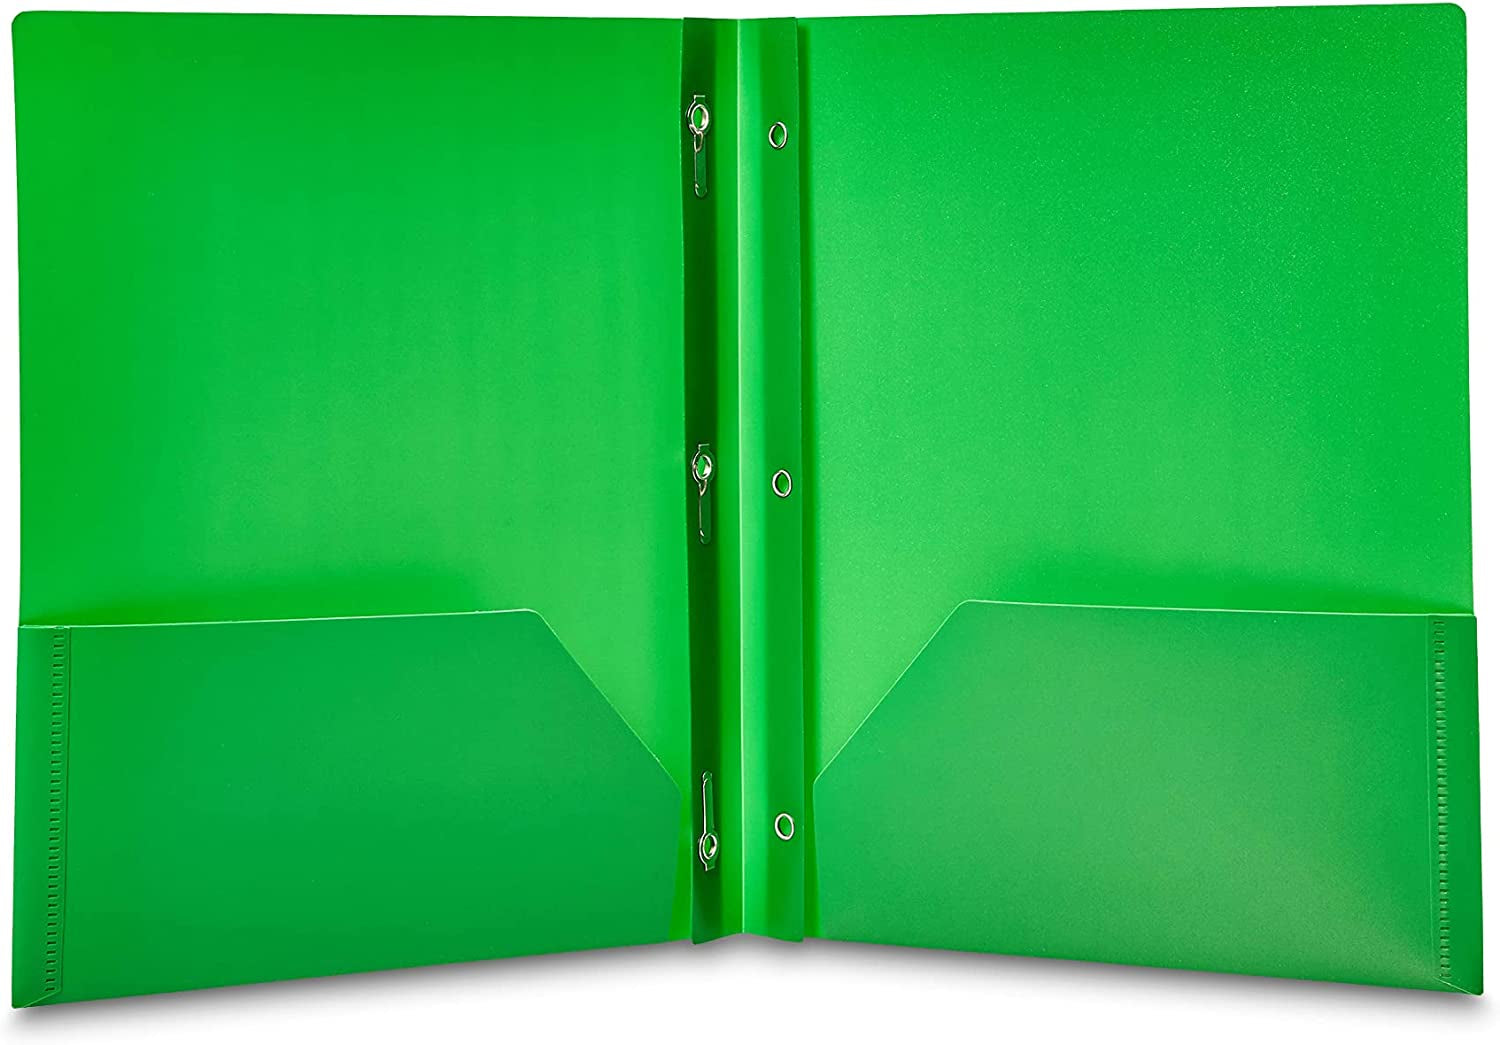 Amazon Basics Heavy Duty Plastic Folders with 2 Pockets for Letter Size Paper, Pack of 12, Assorted Color